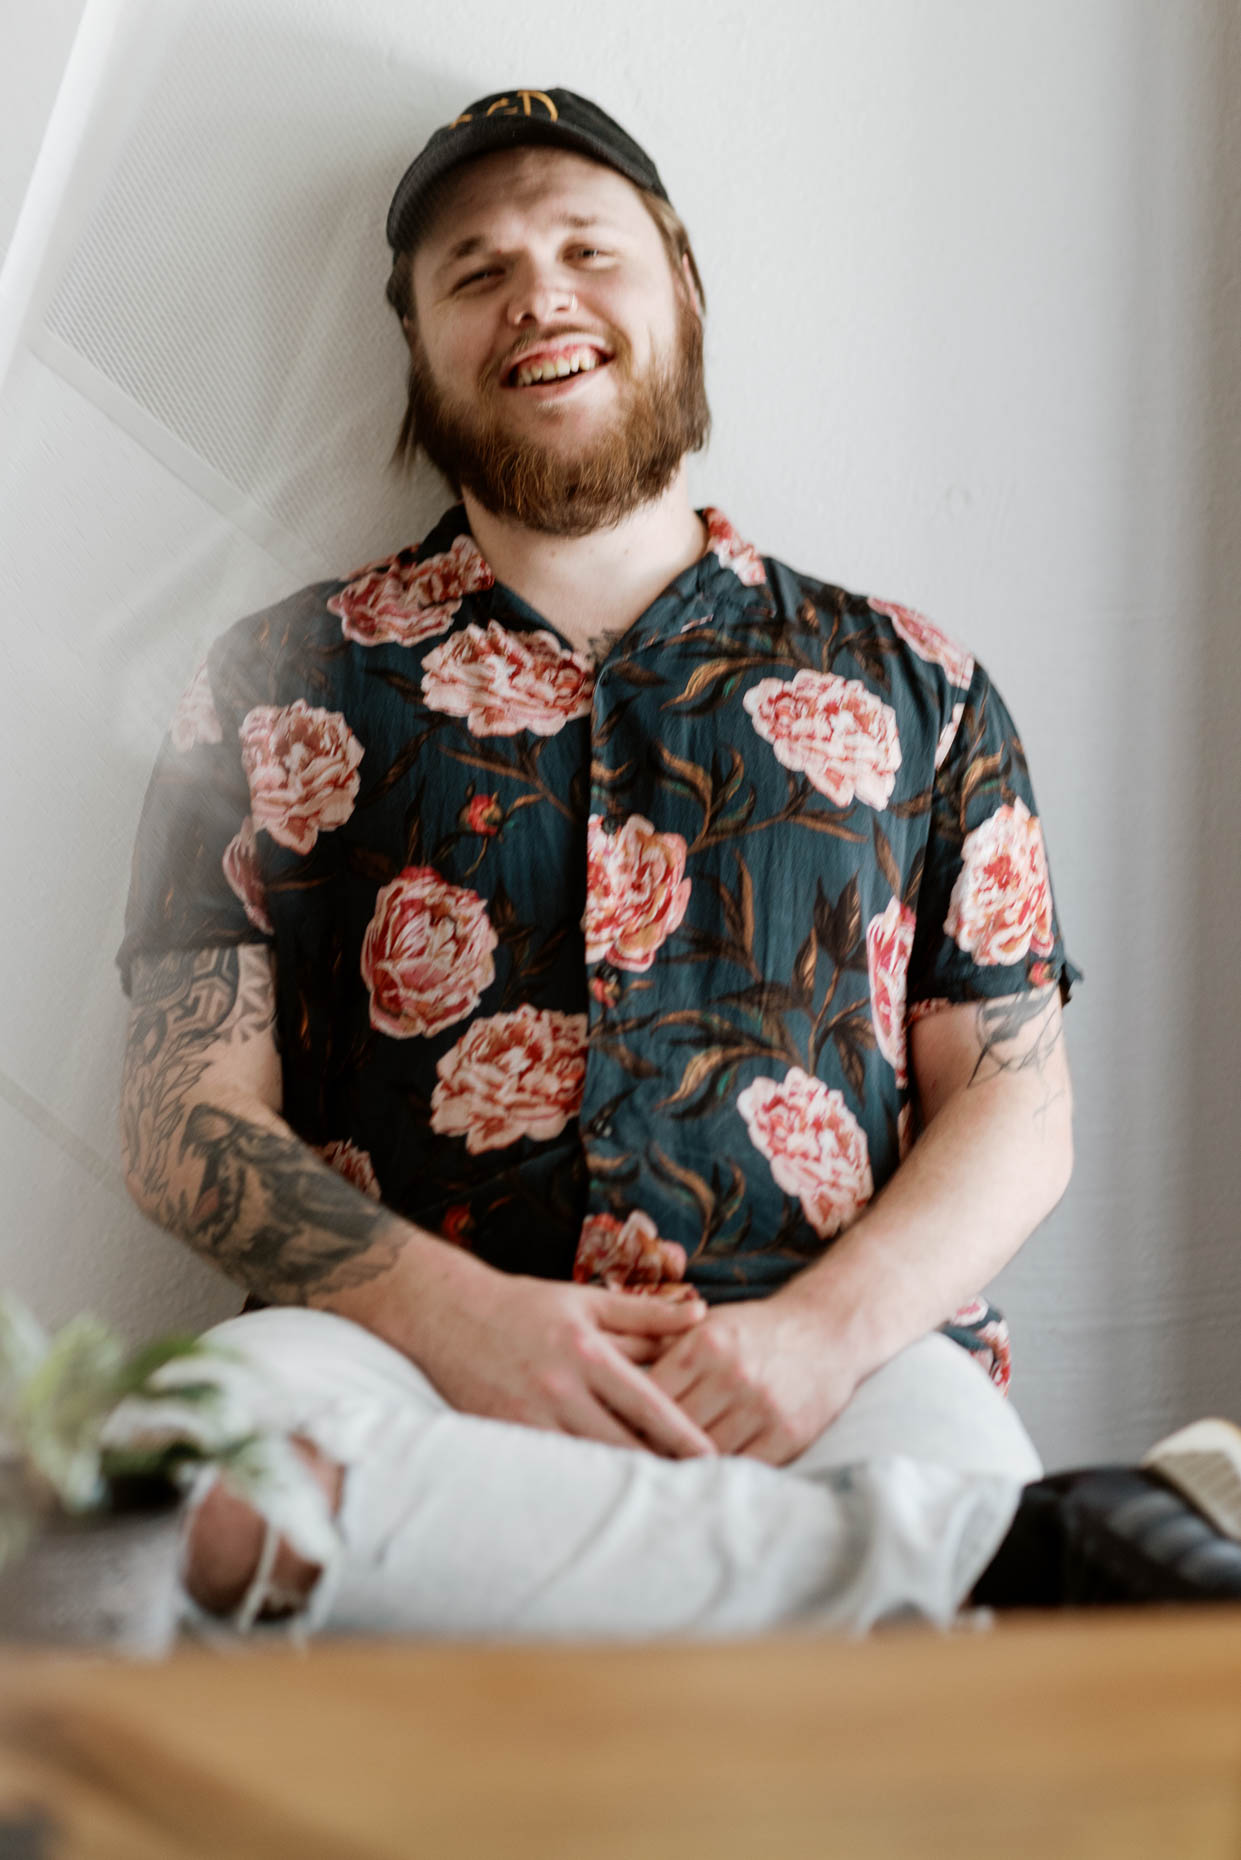 Relaxed and fun portrait of a young hipster guy wearing a cap and floral pattern shirt